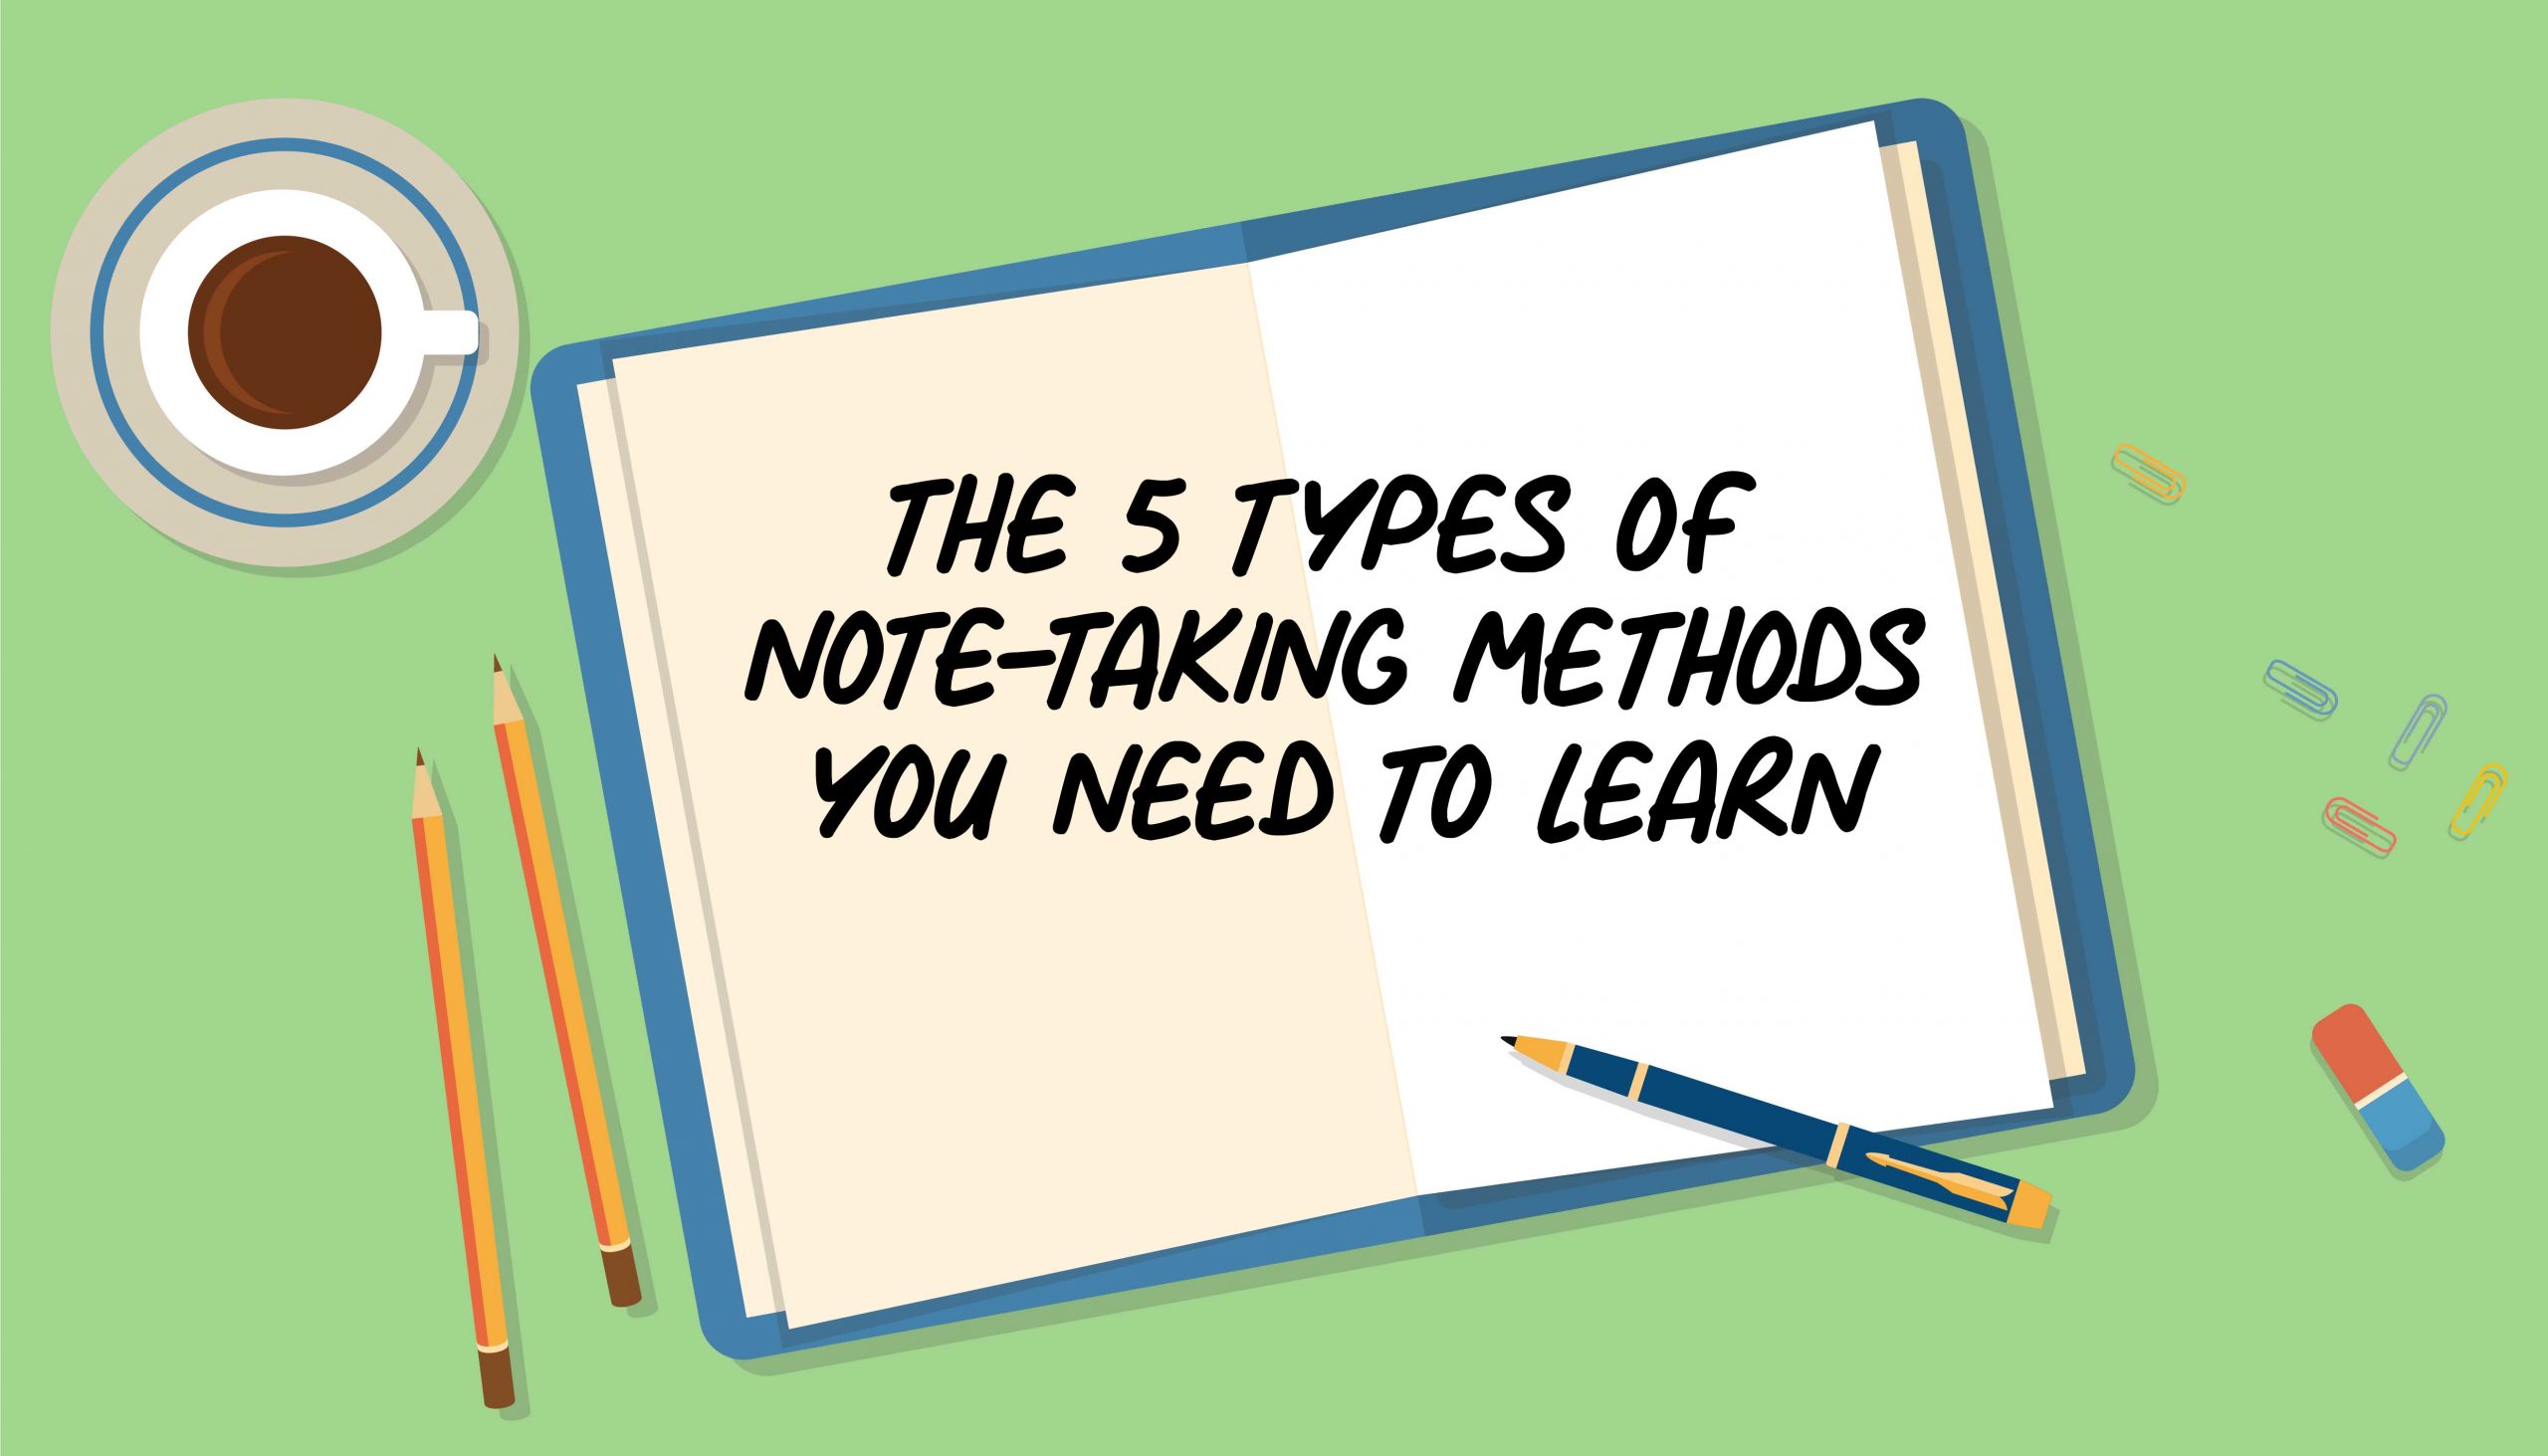 How I take notes - Tips for neat and efficient note taking